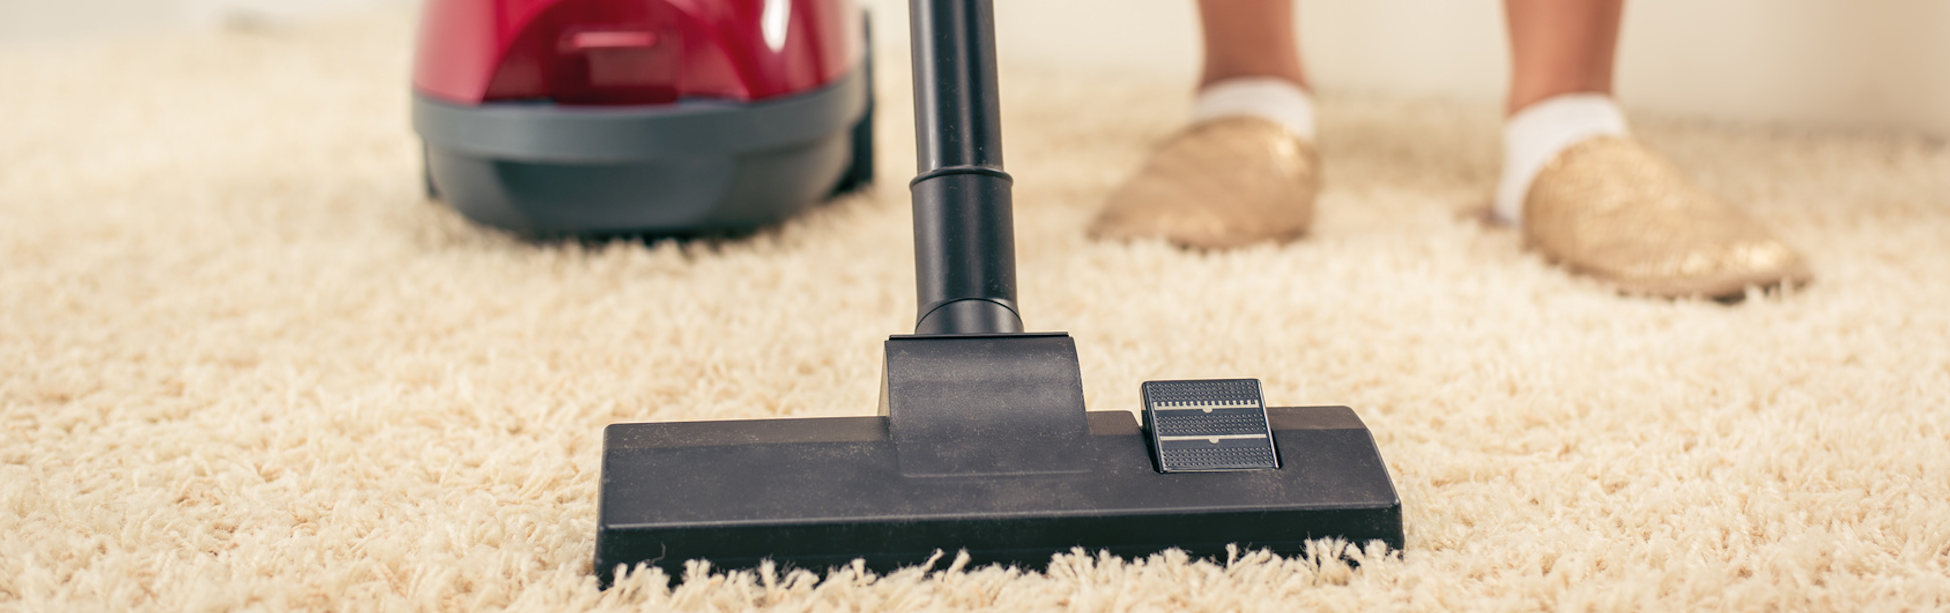 Woman vacuuming the house. Close-up with vacuum cleaner.